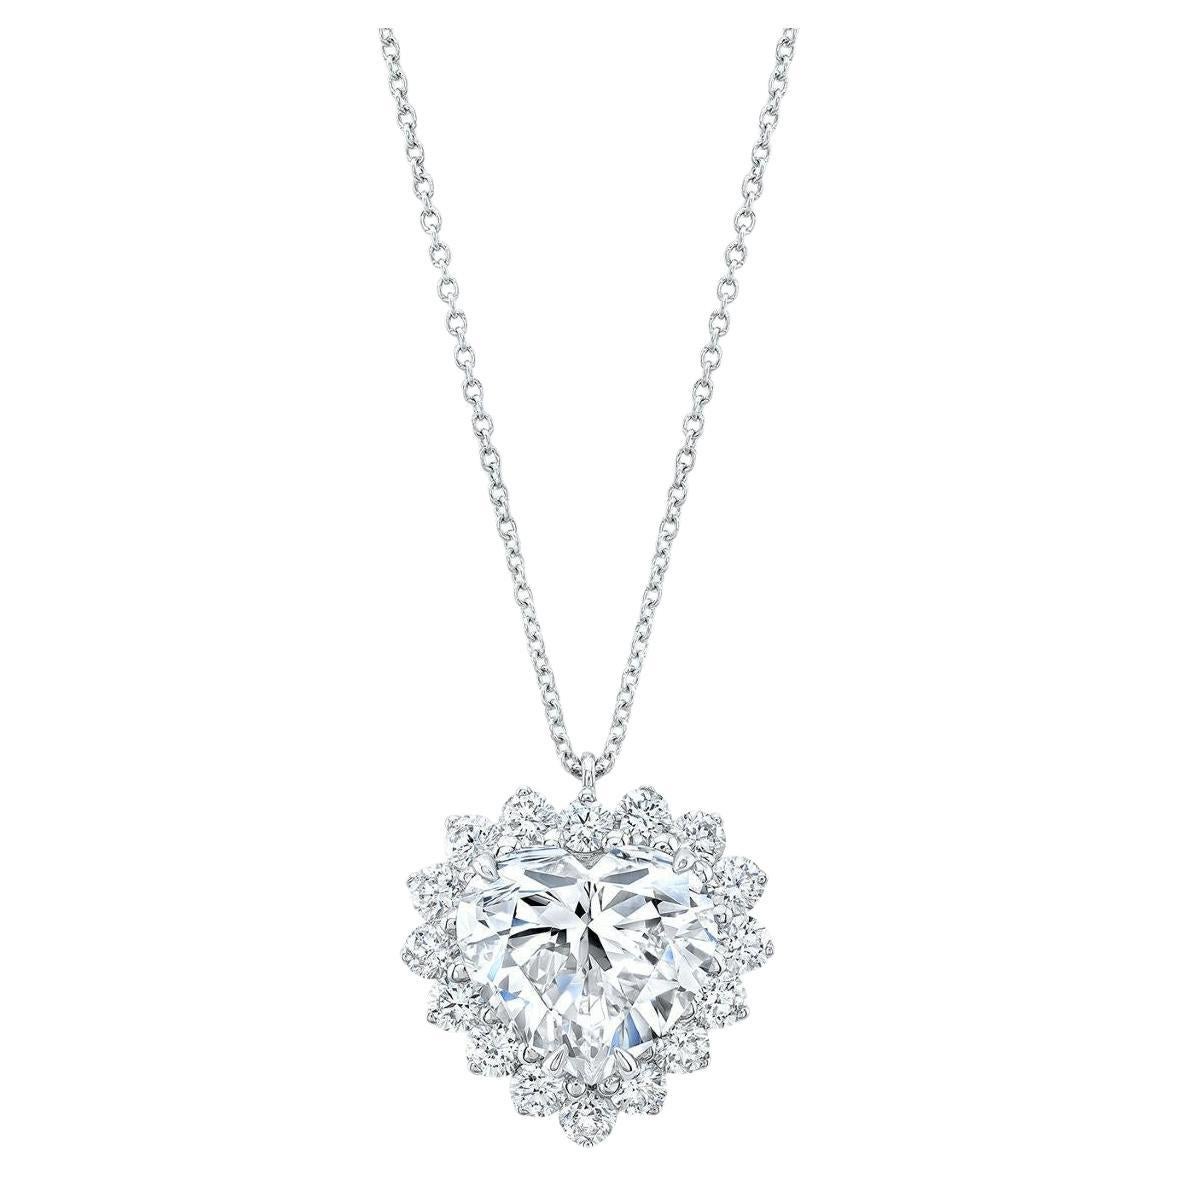 Introducing Elegance Redefined: The Heart Shape Diamond Pendant in Platinum!

Behold the exquisite beauty of our Platinum pendant featuring a captivating 5.00 carat Heart Shape Diamond at its center. Surrounding it are 16 Round Brilliant cut